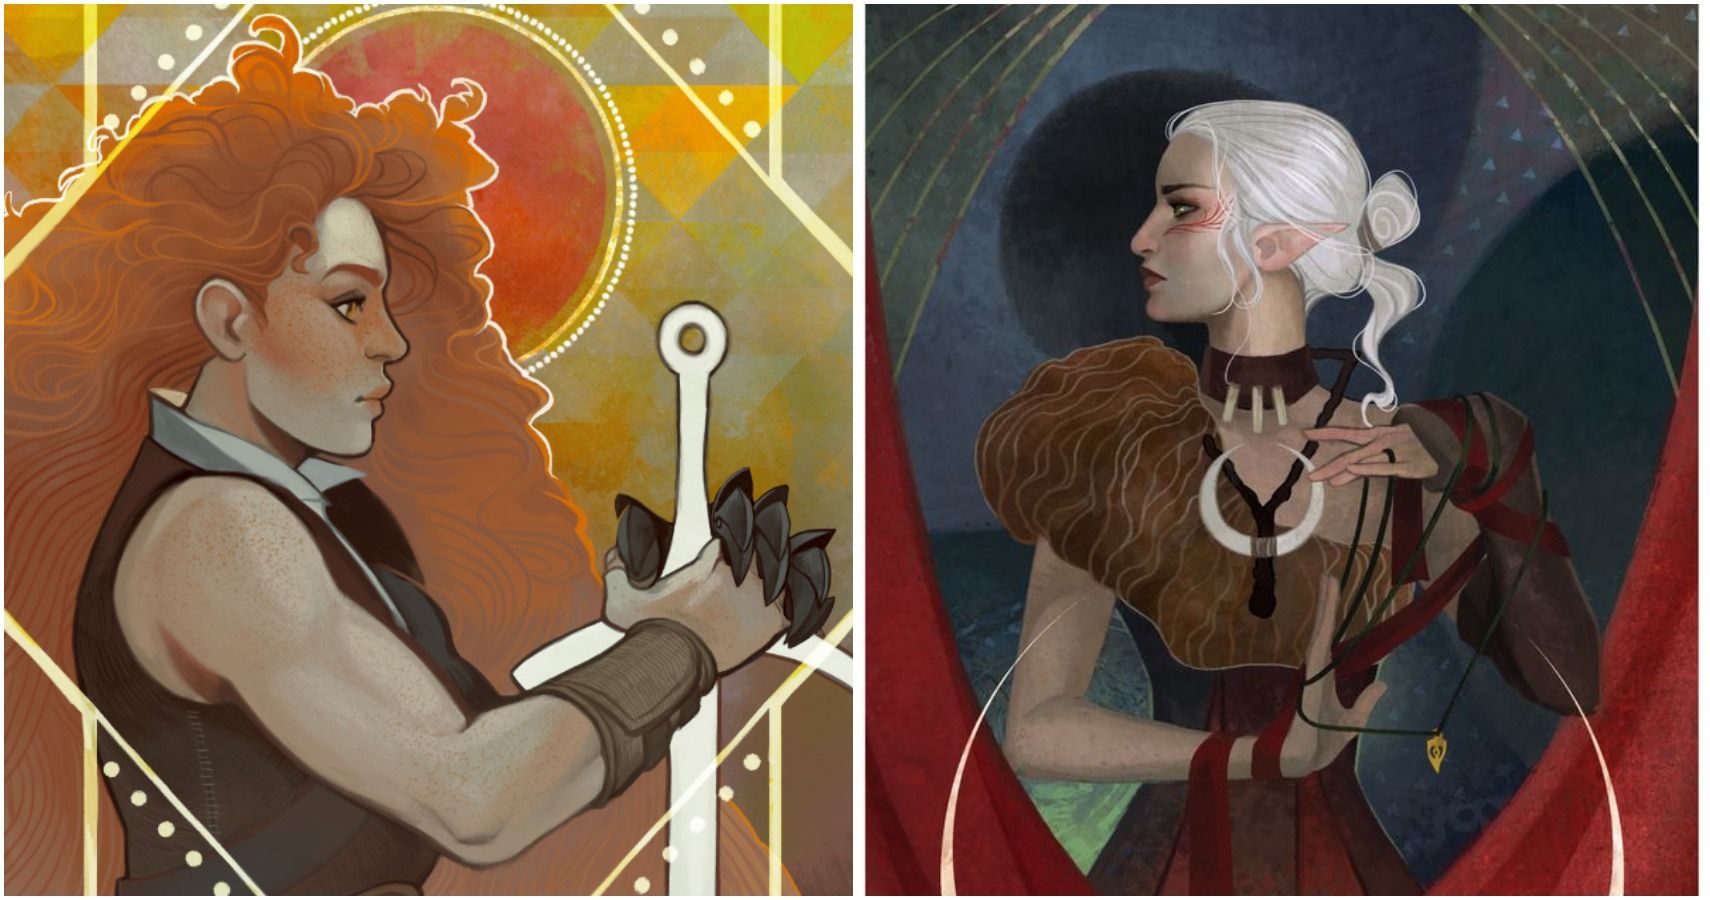 Dragon Age 10 Fan Made Tarot Cards Of The Inquisitor That Look Like They Belong In The Game